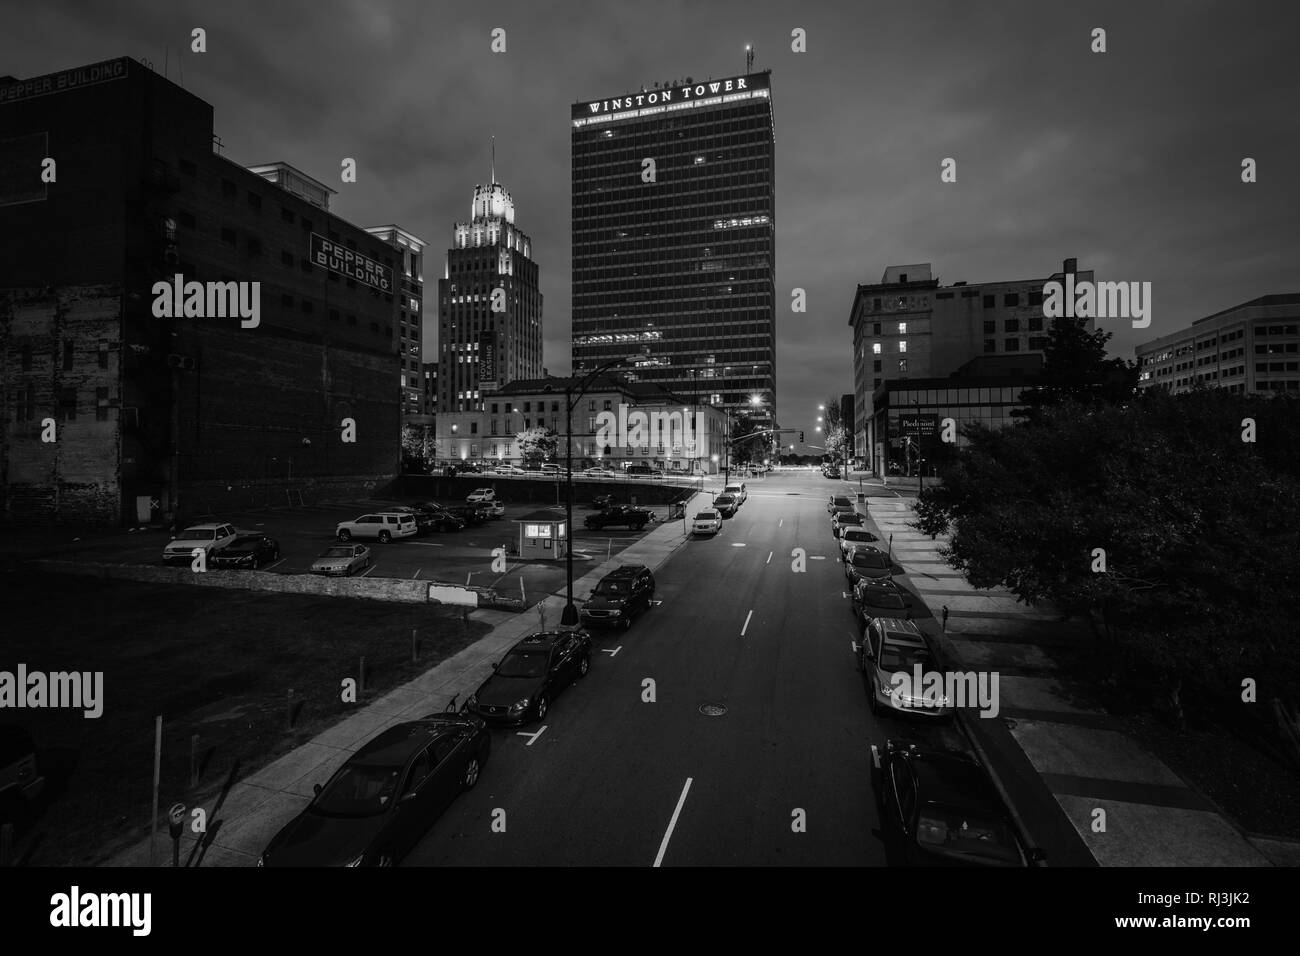 3rd Street and buildings at night, in downtown Winston-Salem, North Carolina. Stock Photo